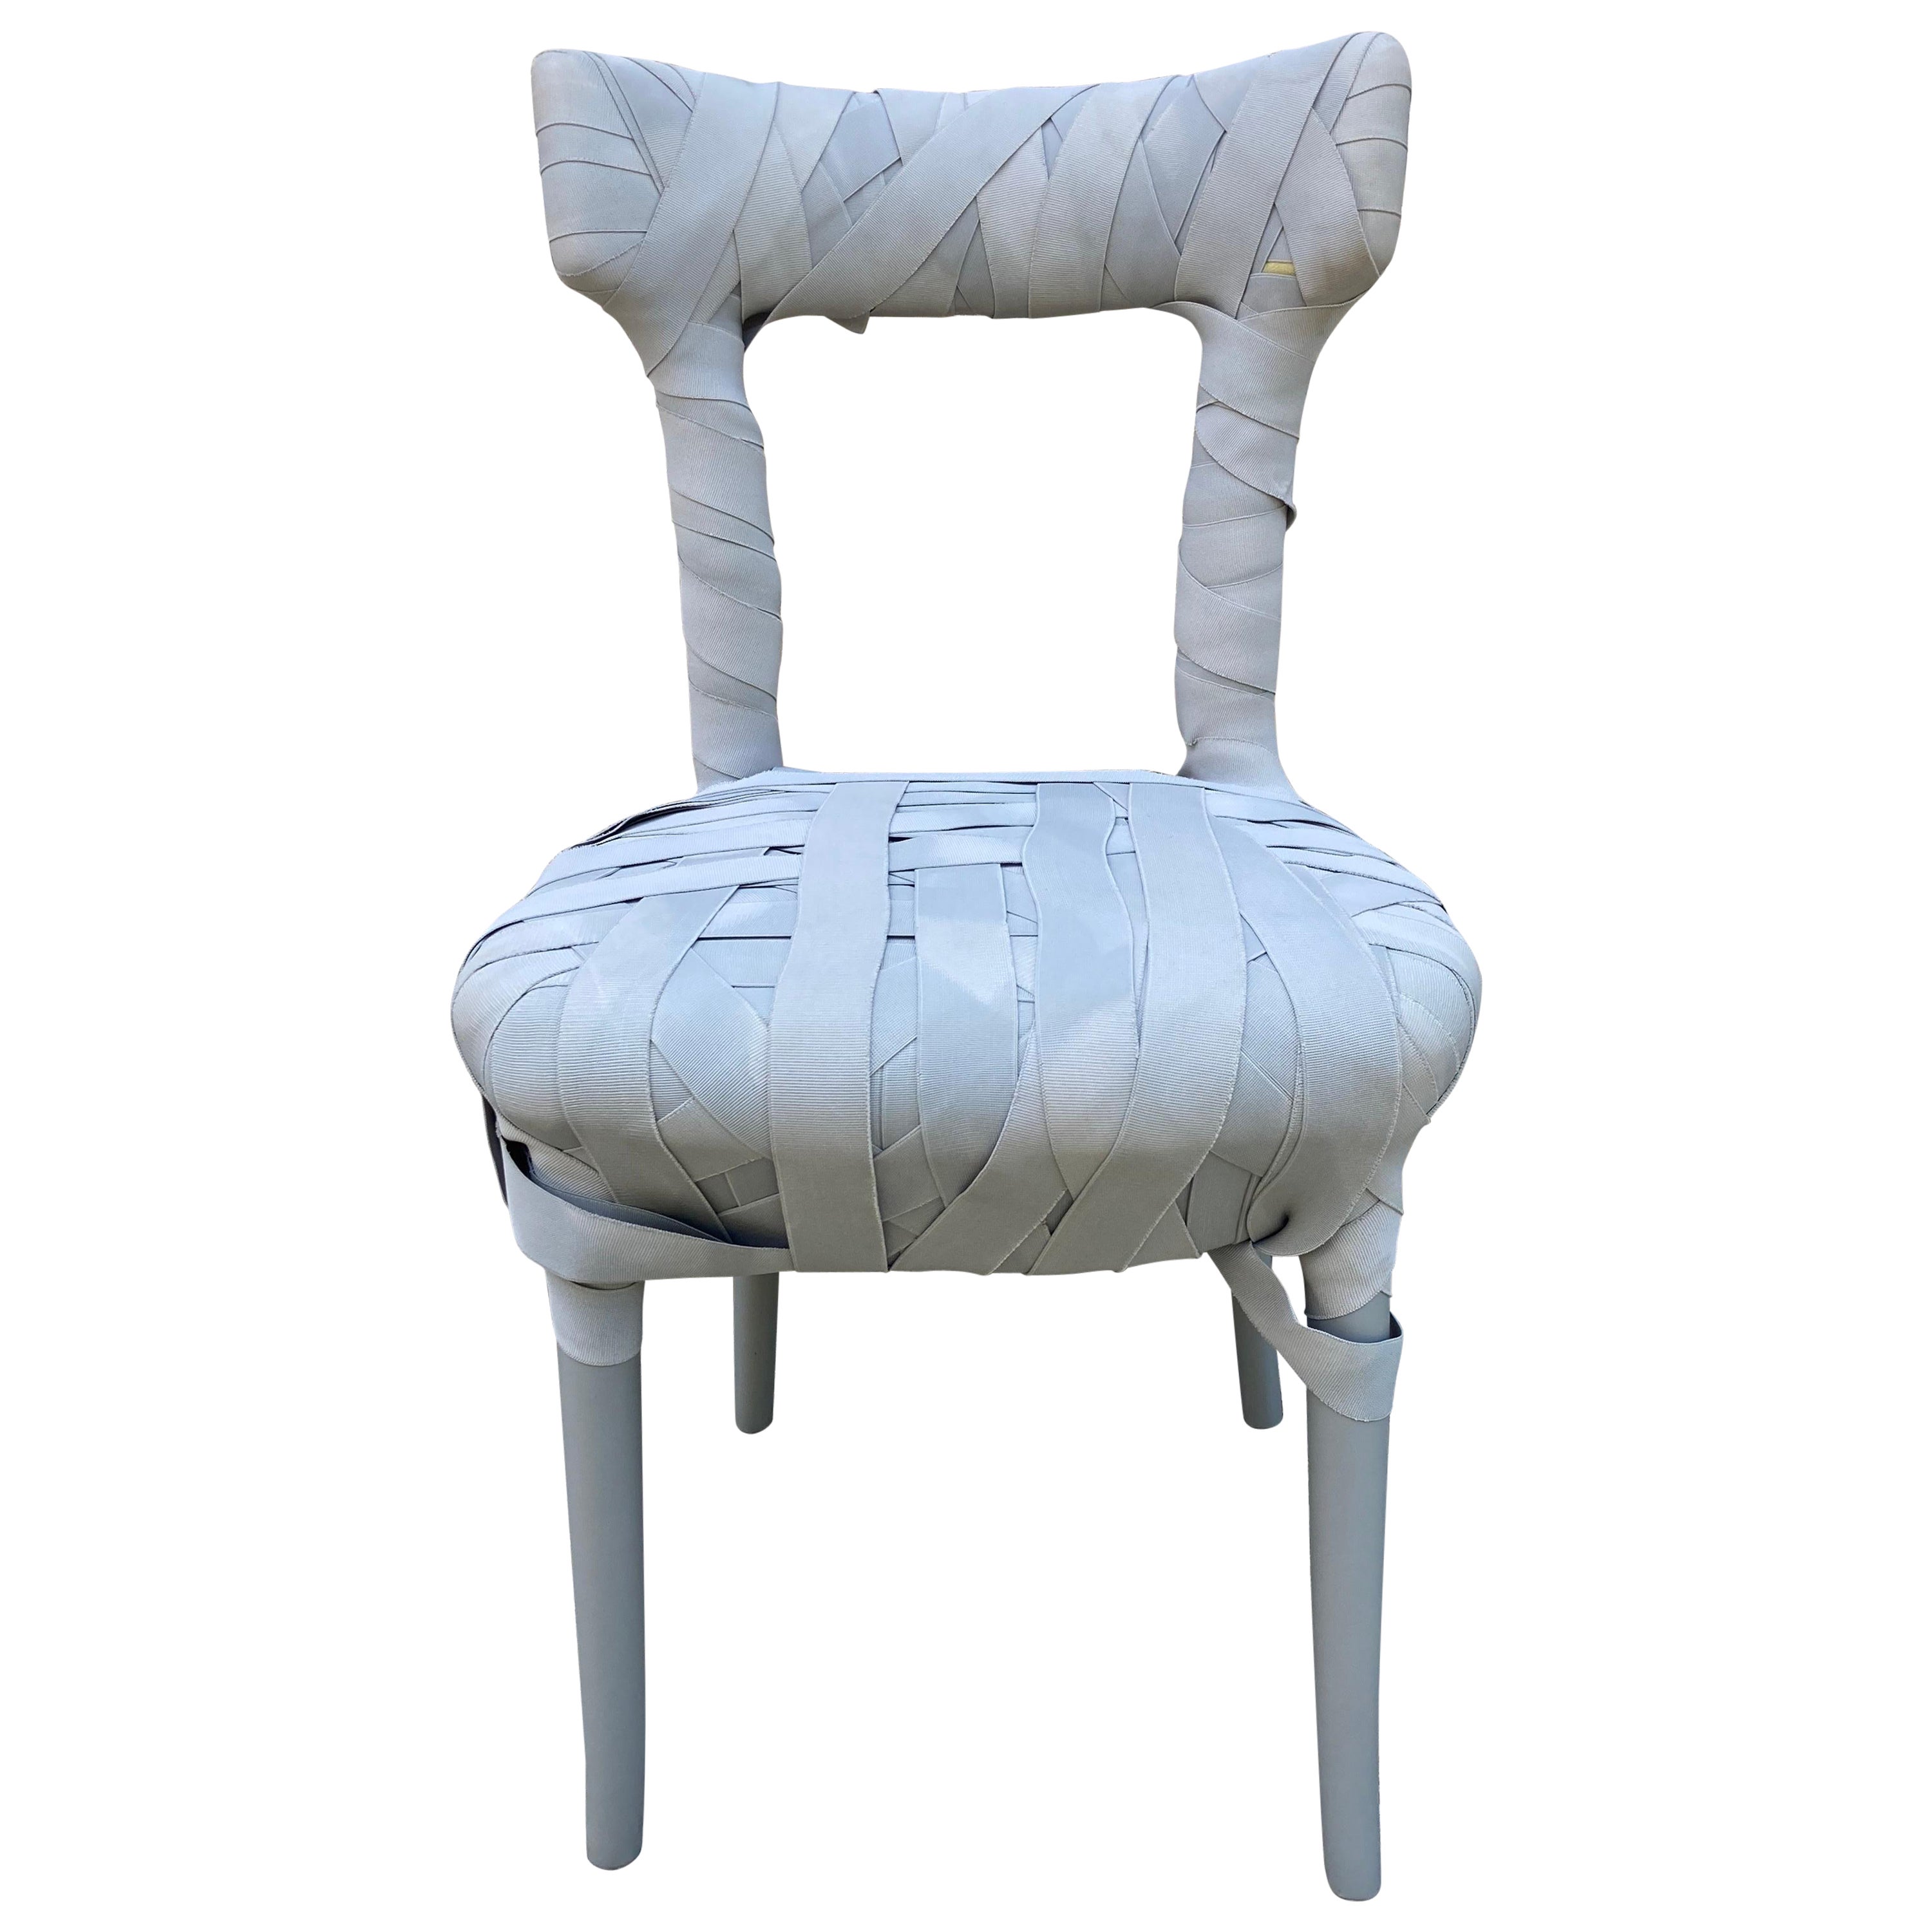 Peter Traag for Edra "Mummy Chair" For Sale